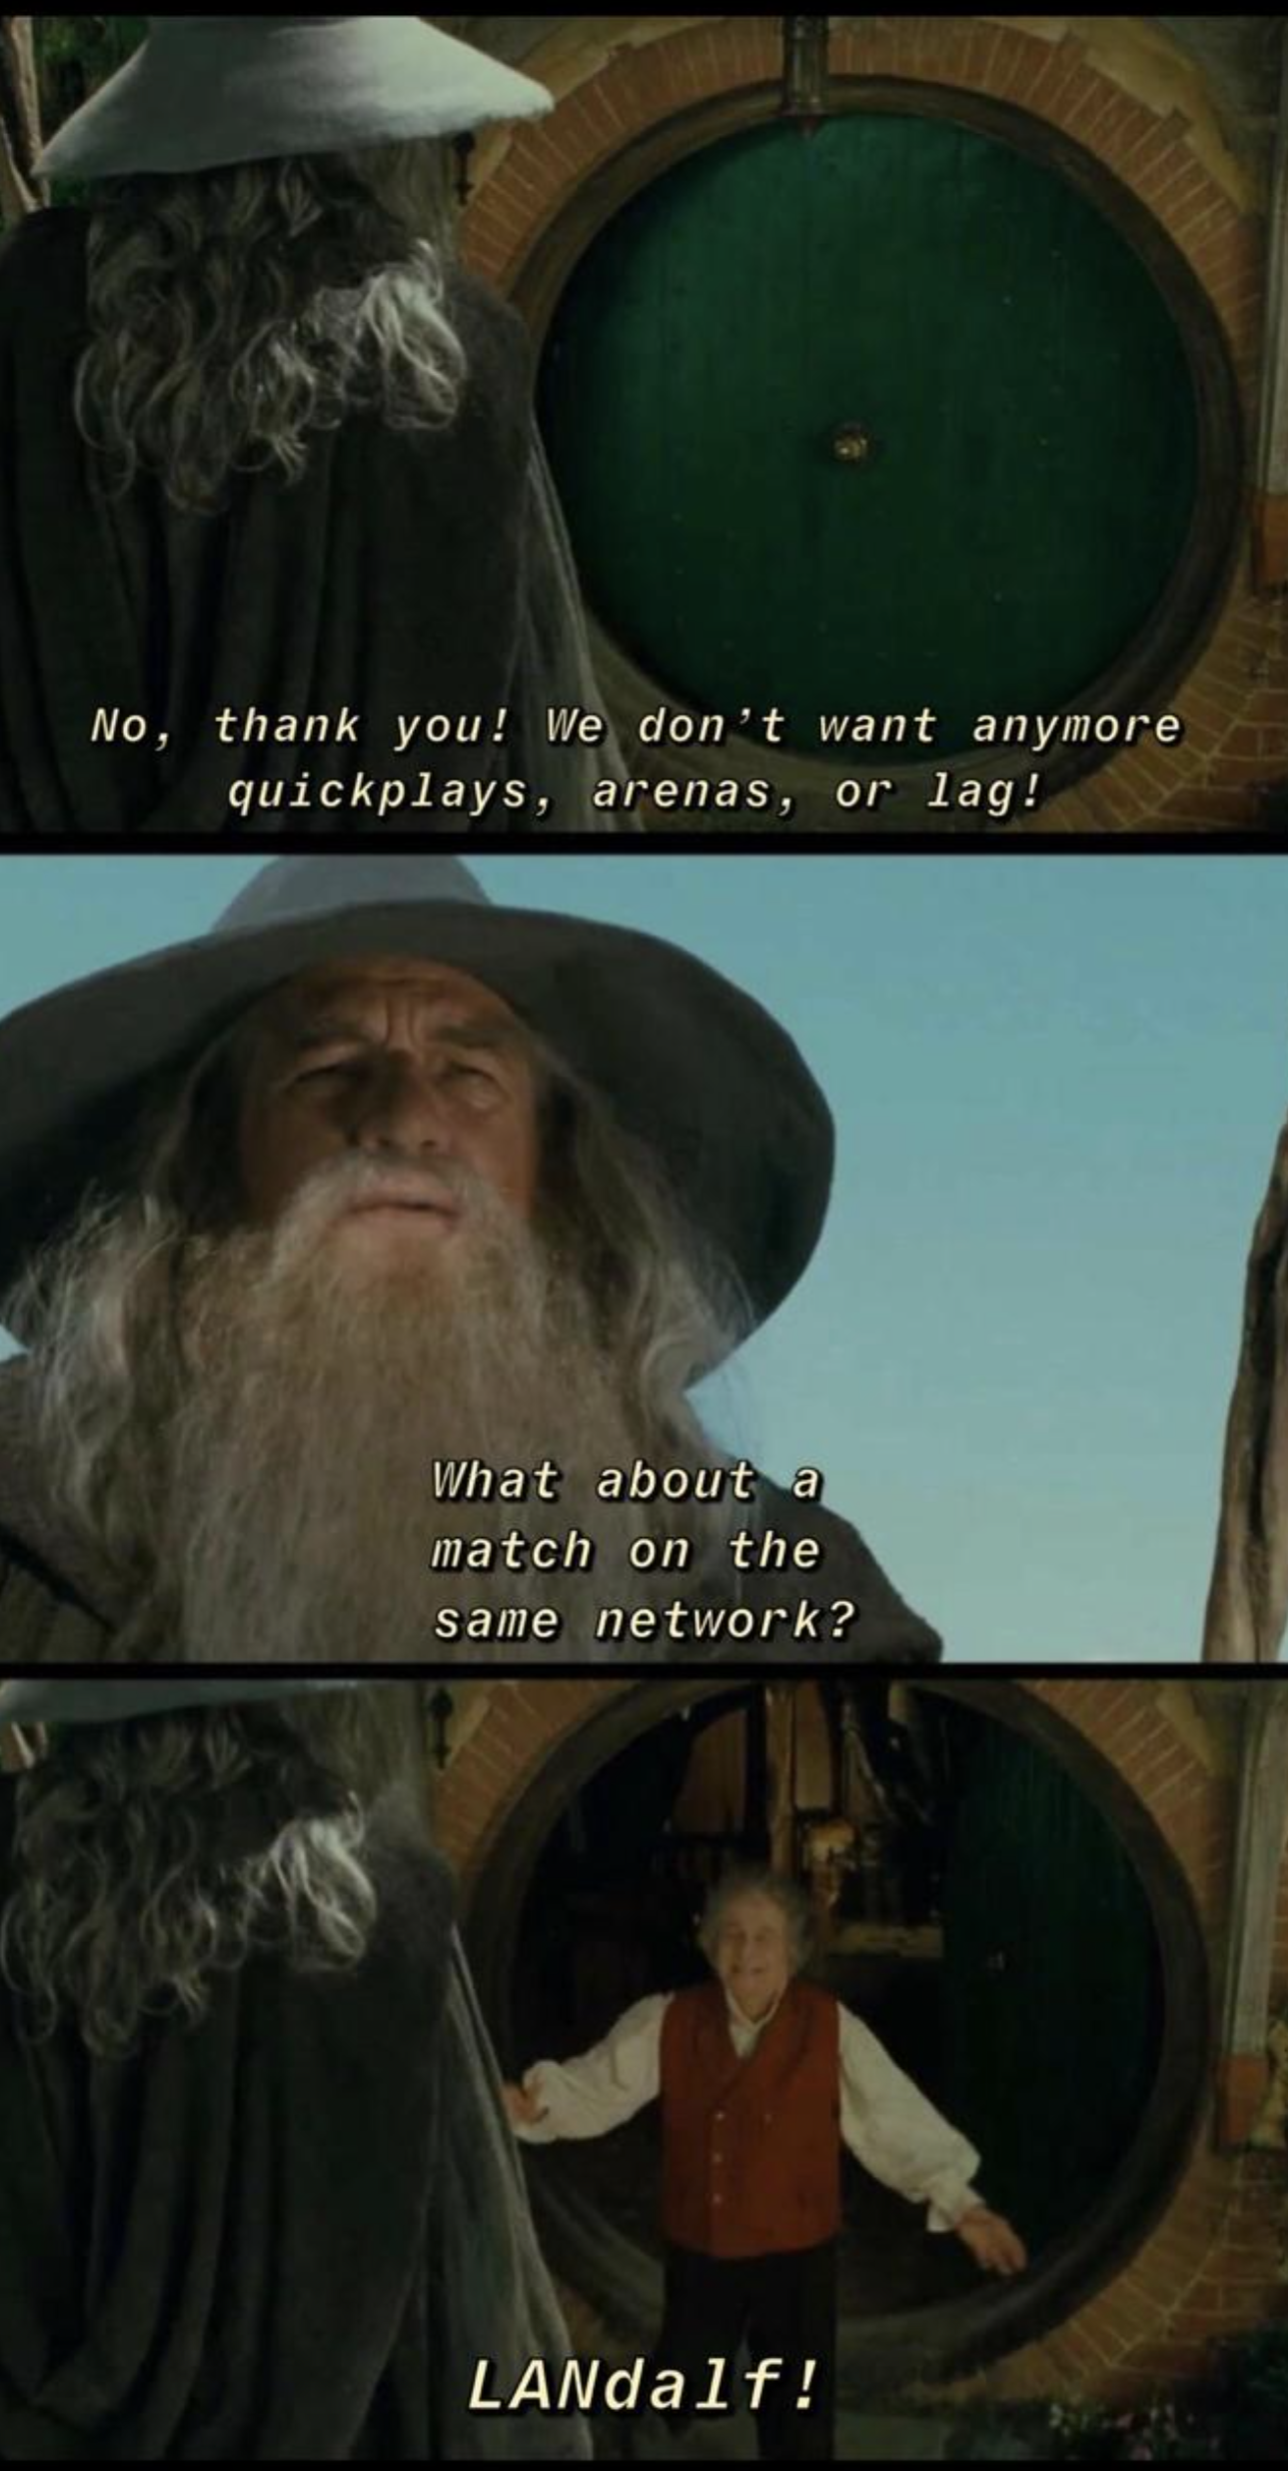 funny gaming memes - gandalf meme bilbo - No, thank you! We don't want anymore quickplays, arenas, or lag! what about atch on the Same network? LANdalf!